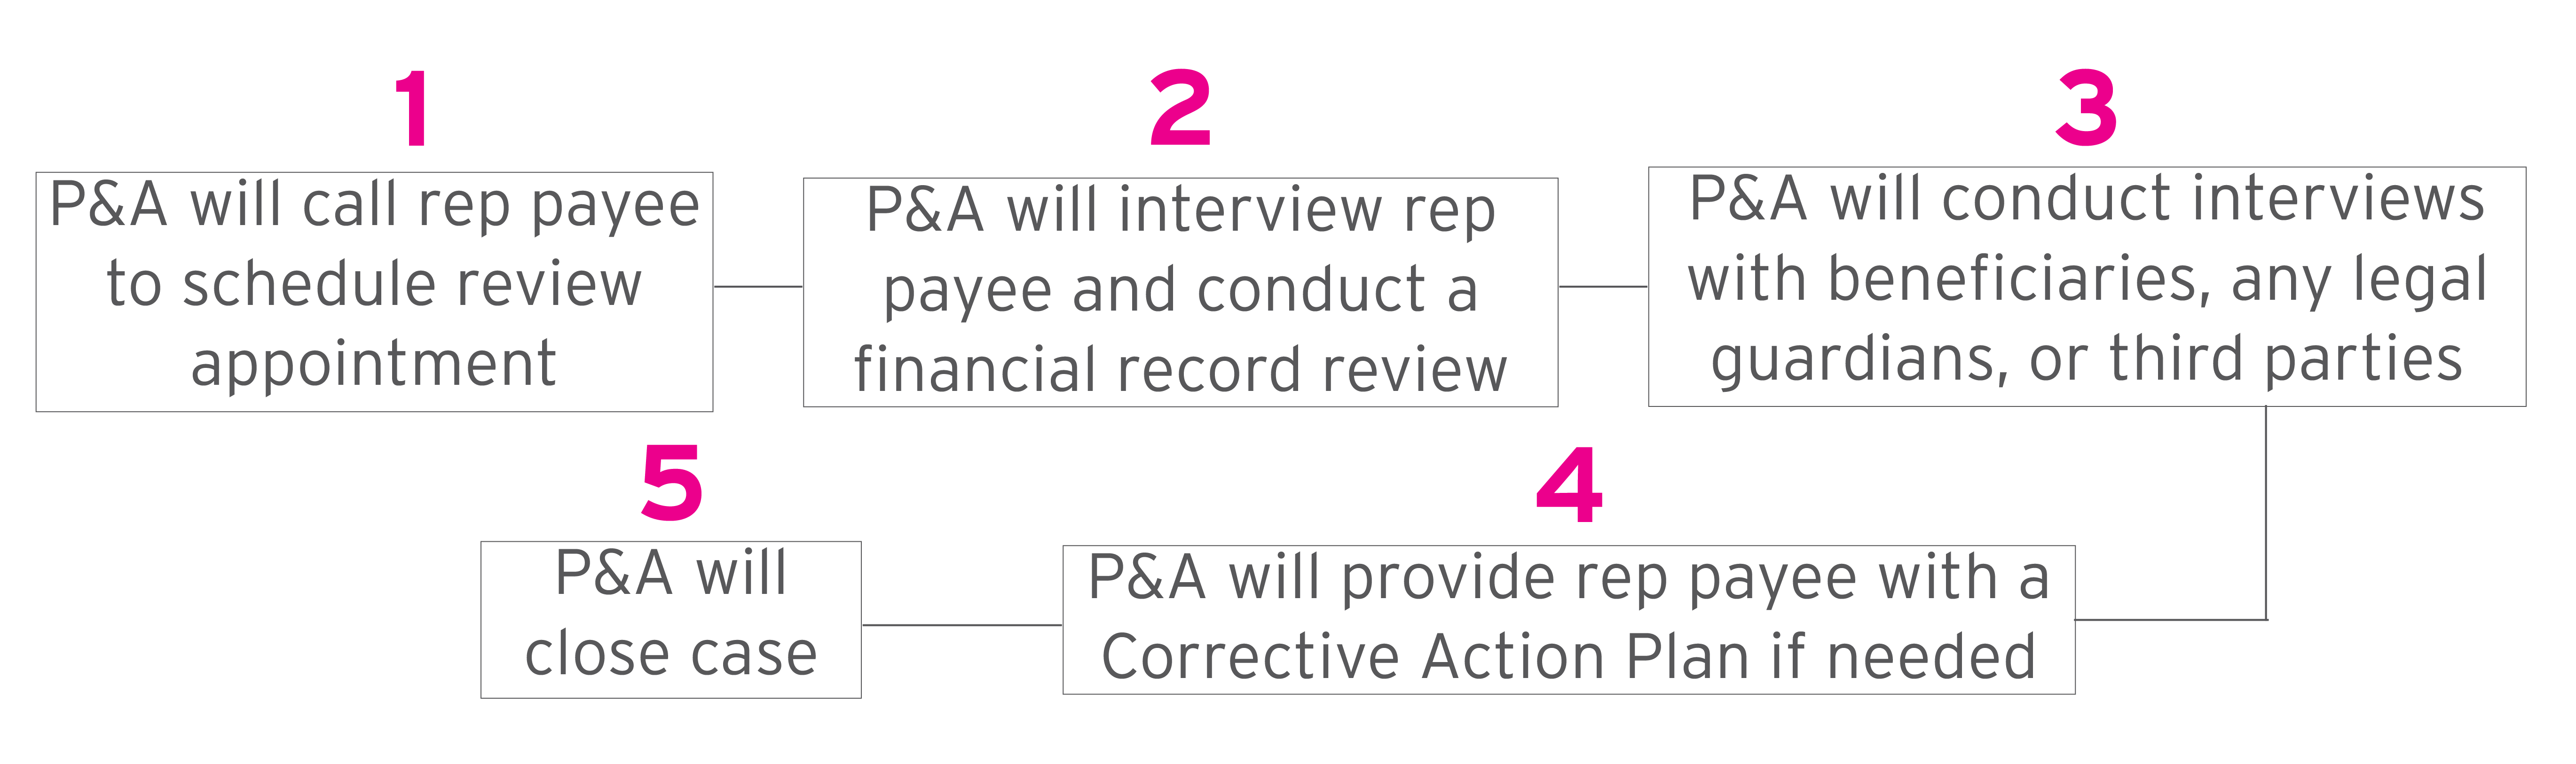 1. P&A will call rep payee to schedule review appointment 2. P&A will interview rep payee and conduct a financial record review 3. P&A will conduct interviews with beneficiaries, any legal guardians, or third parties 4. P&A will provide rep payee with a Corrective Action Plan if needed 5. P&A will close case